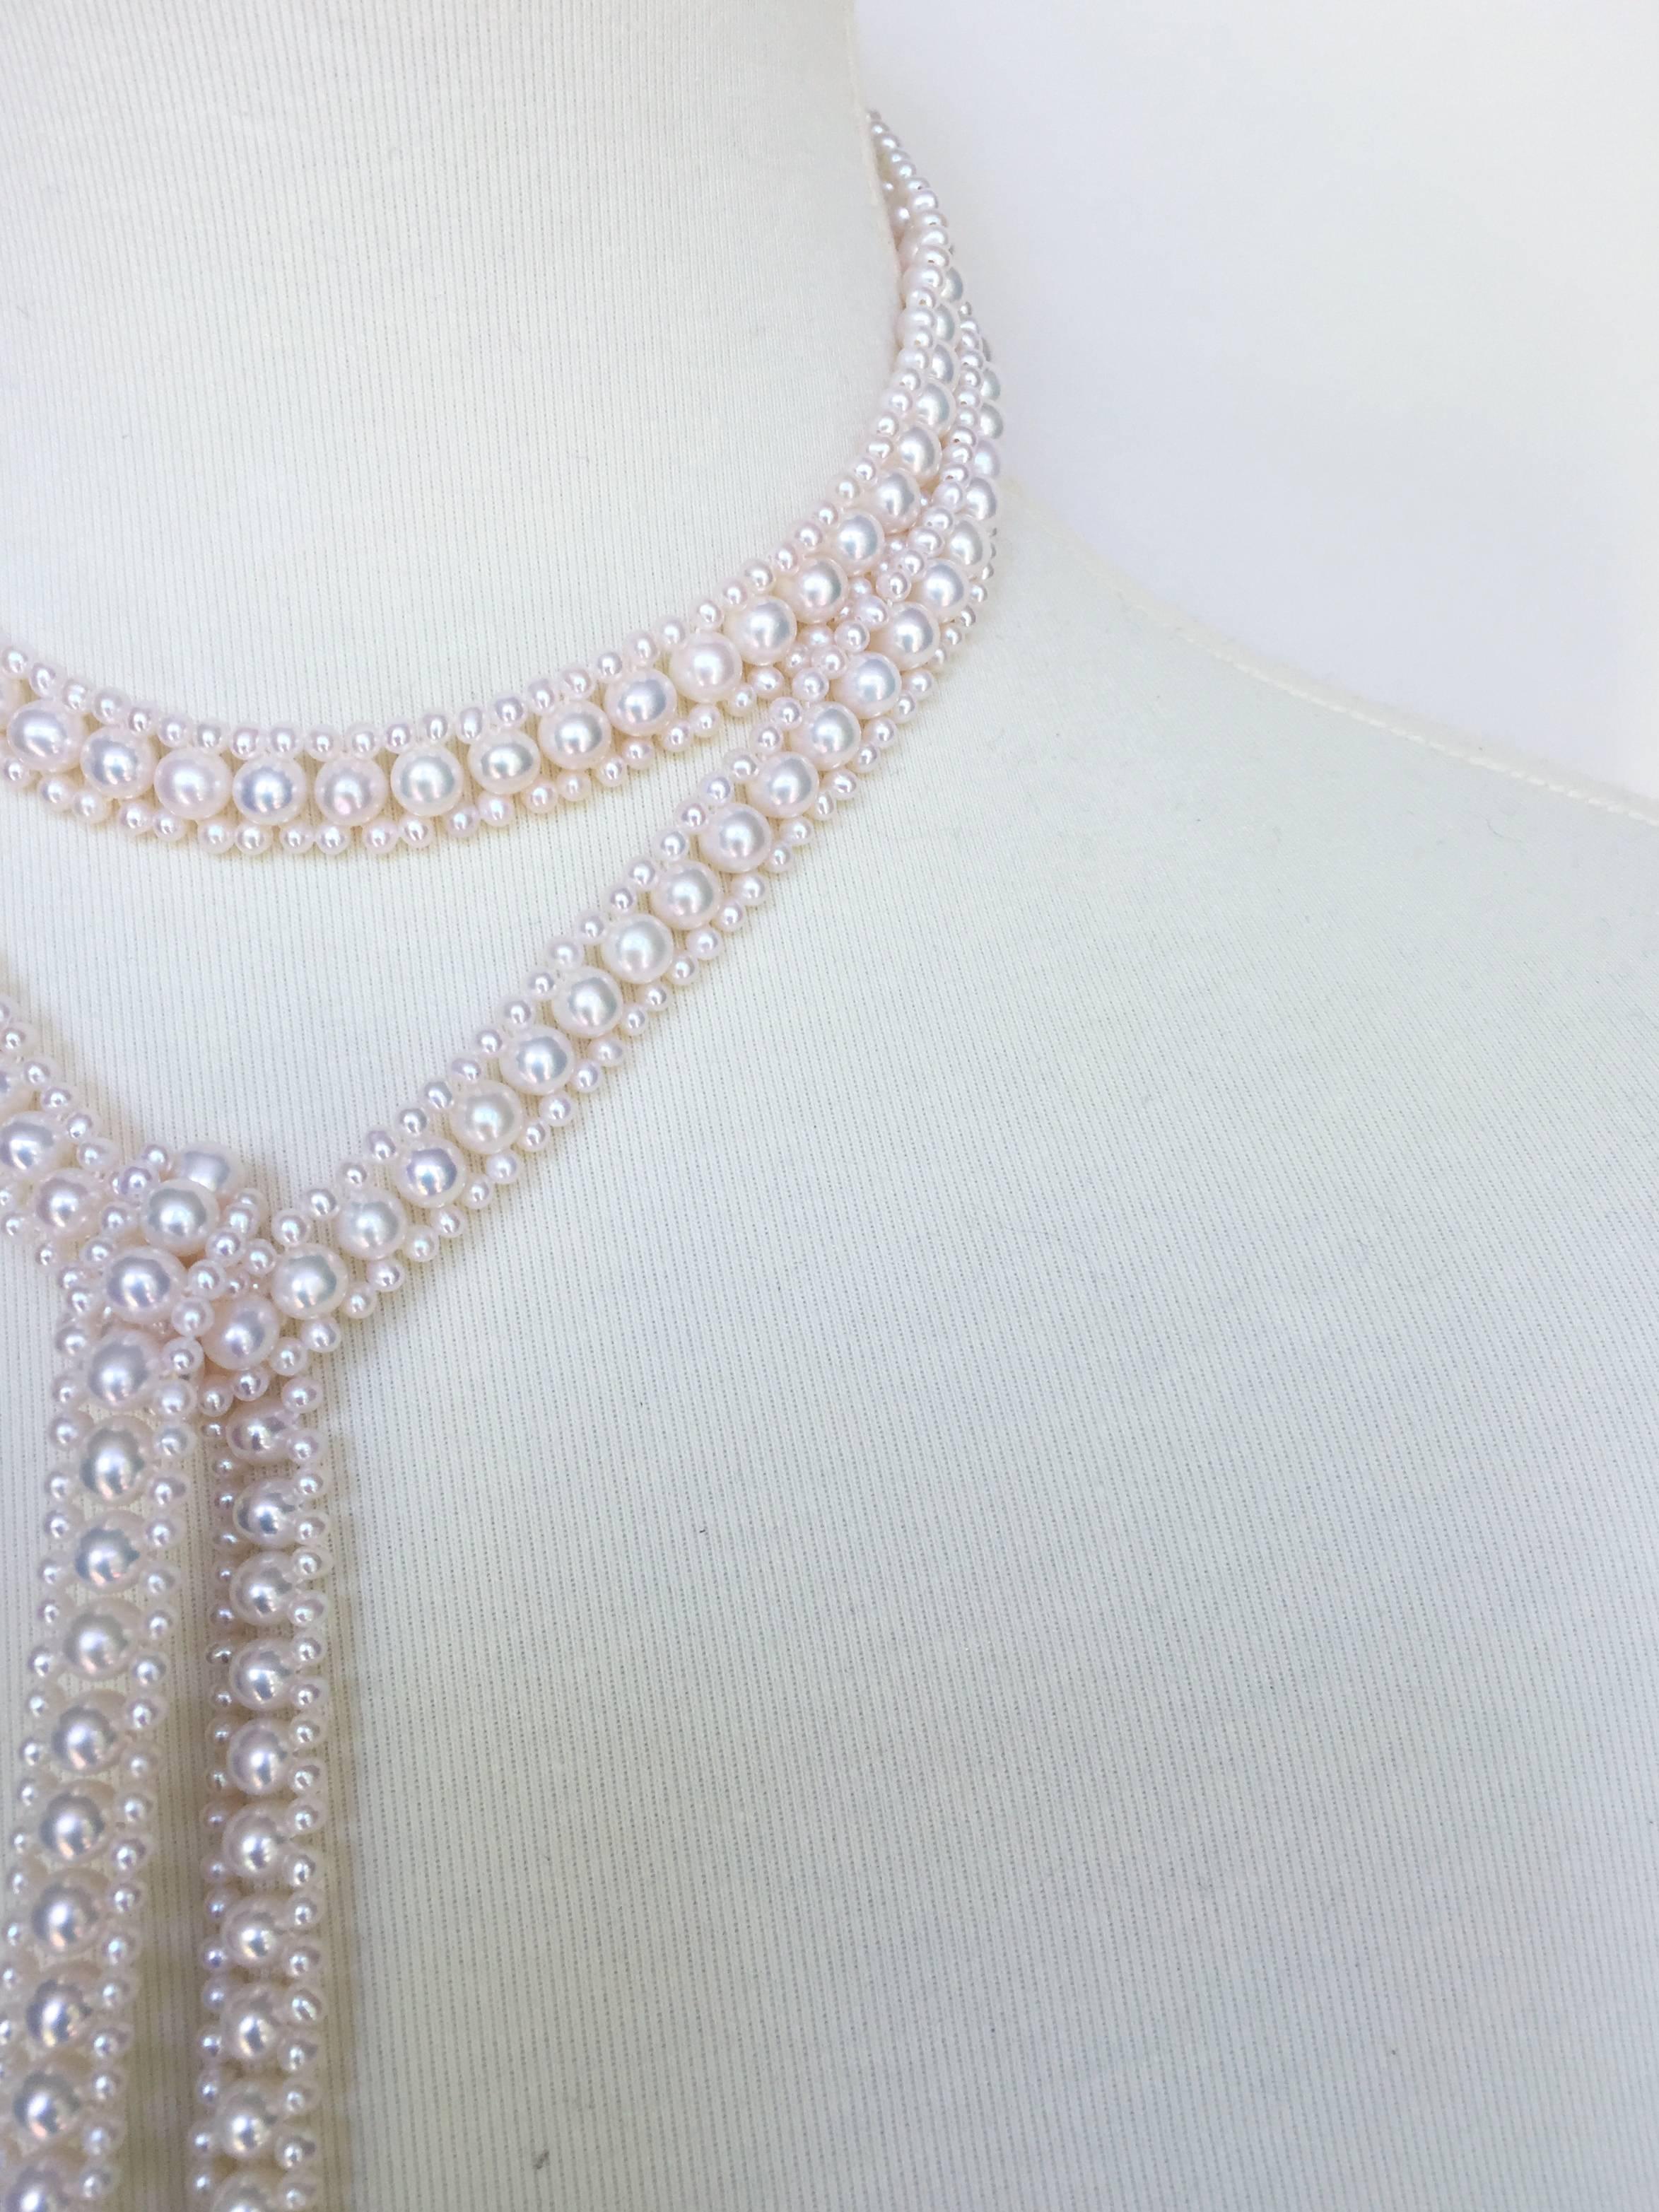 This elegant sautoir is woven into a rope design with round pearls (5.5 mm)  and smaller round pearls (2mm). The tassel is starts off with a large round half pearl and diamond encrusted roundels, finishing off with graduated pearl strands. This